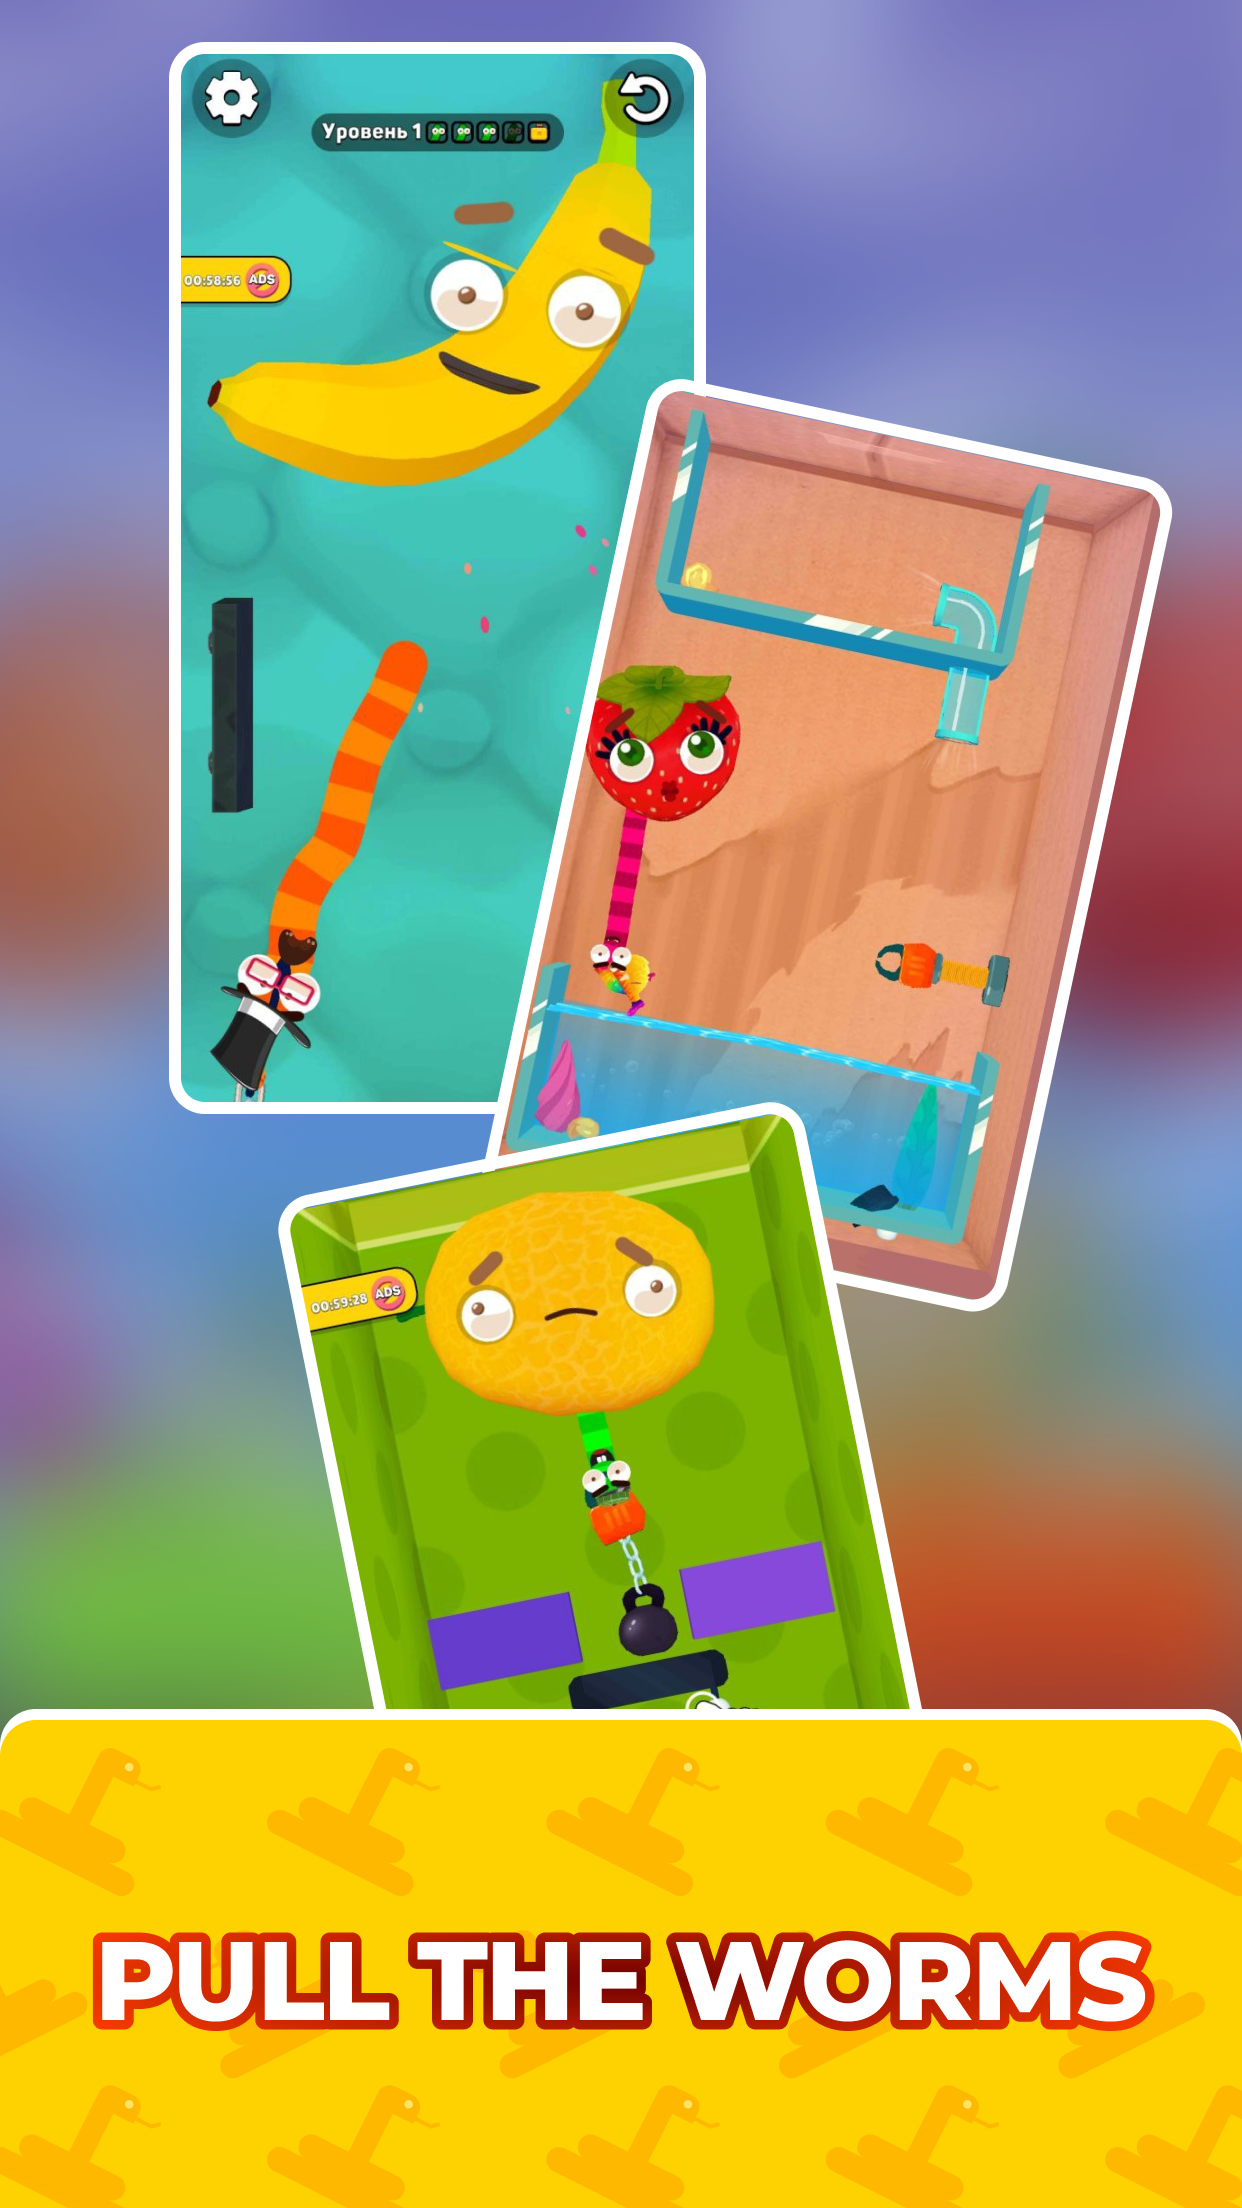 Screenshot 1 of Worm out: Logic puzzle games 5.2.0